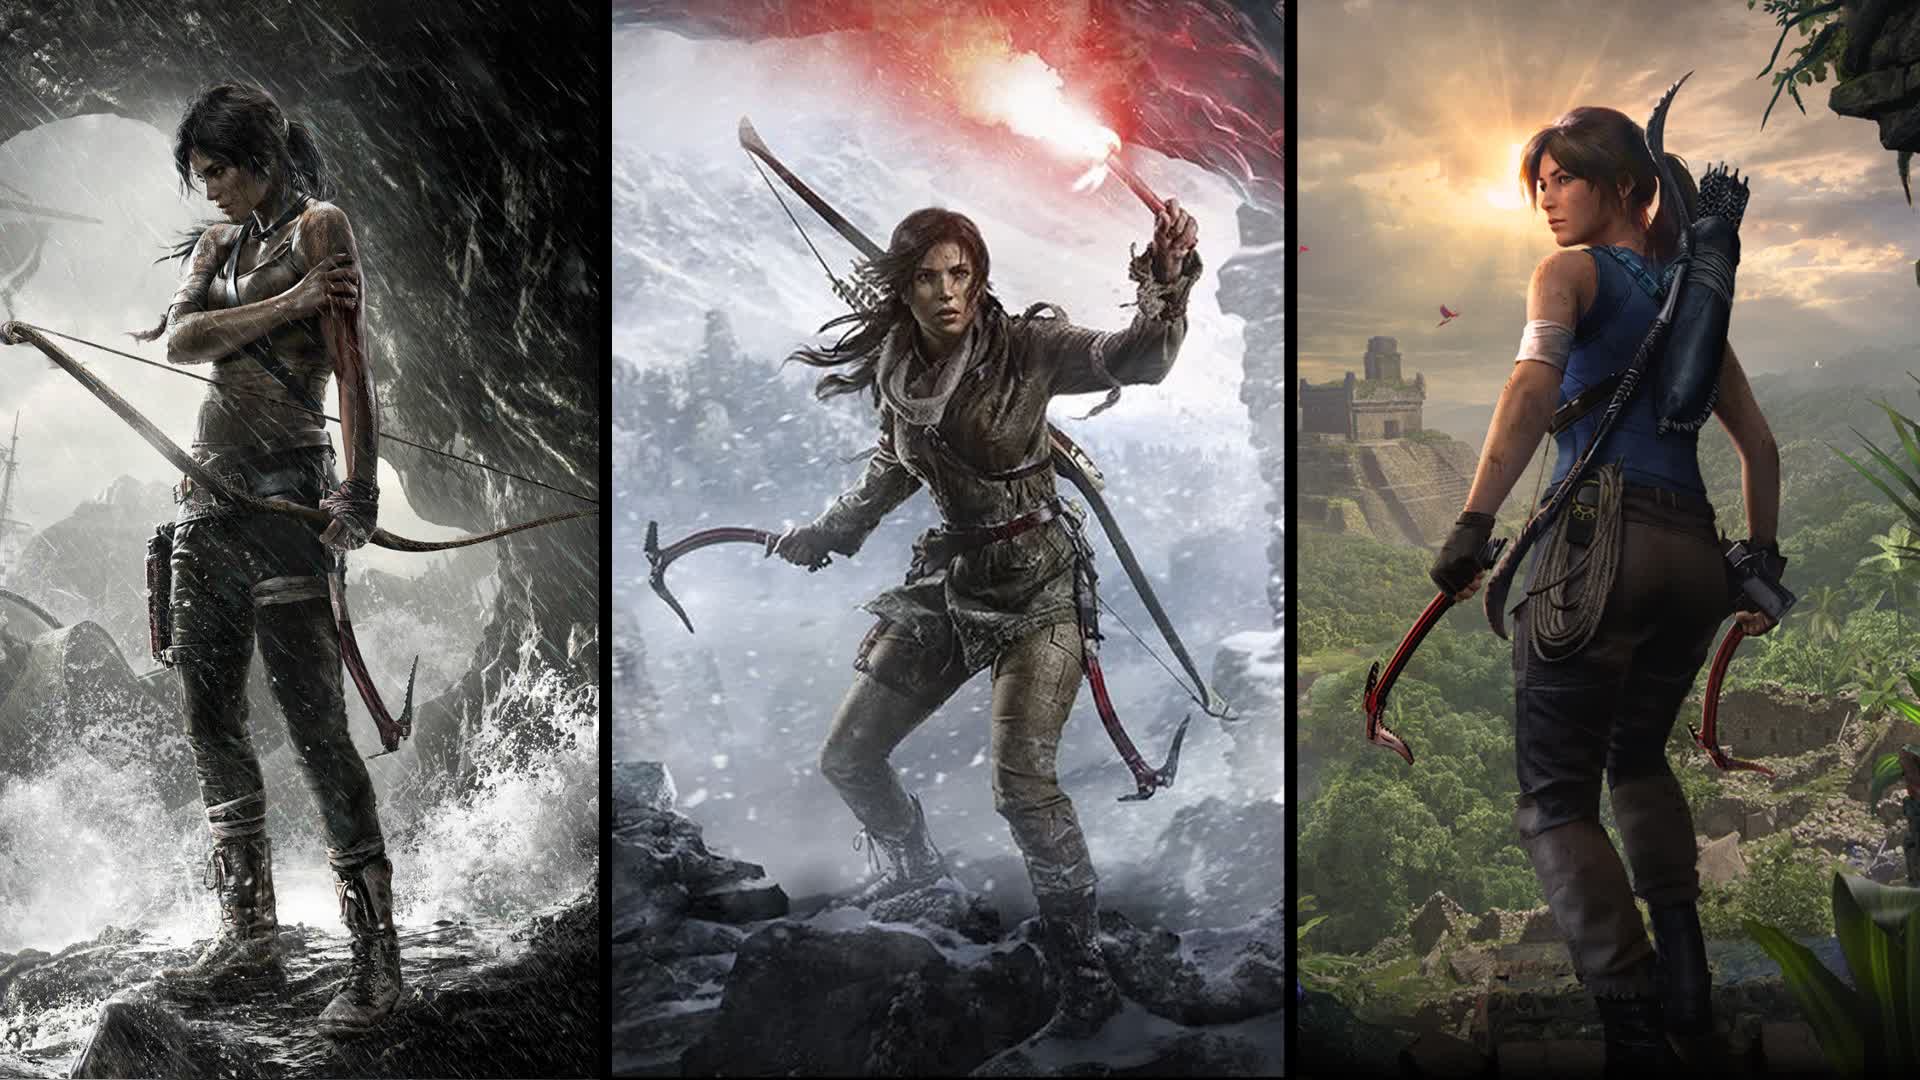 Epic is giving away the entire Tomb Raider trilogy | TechSpot